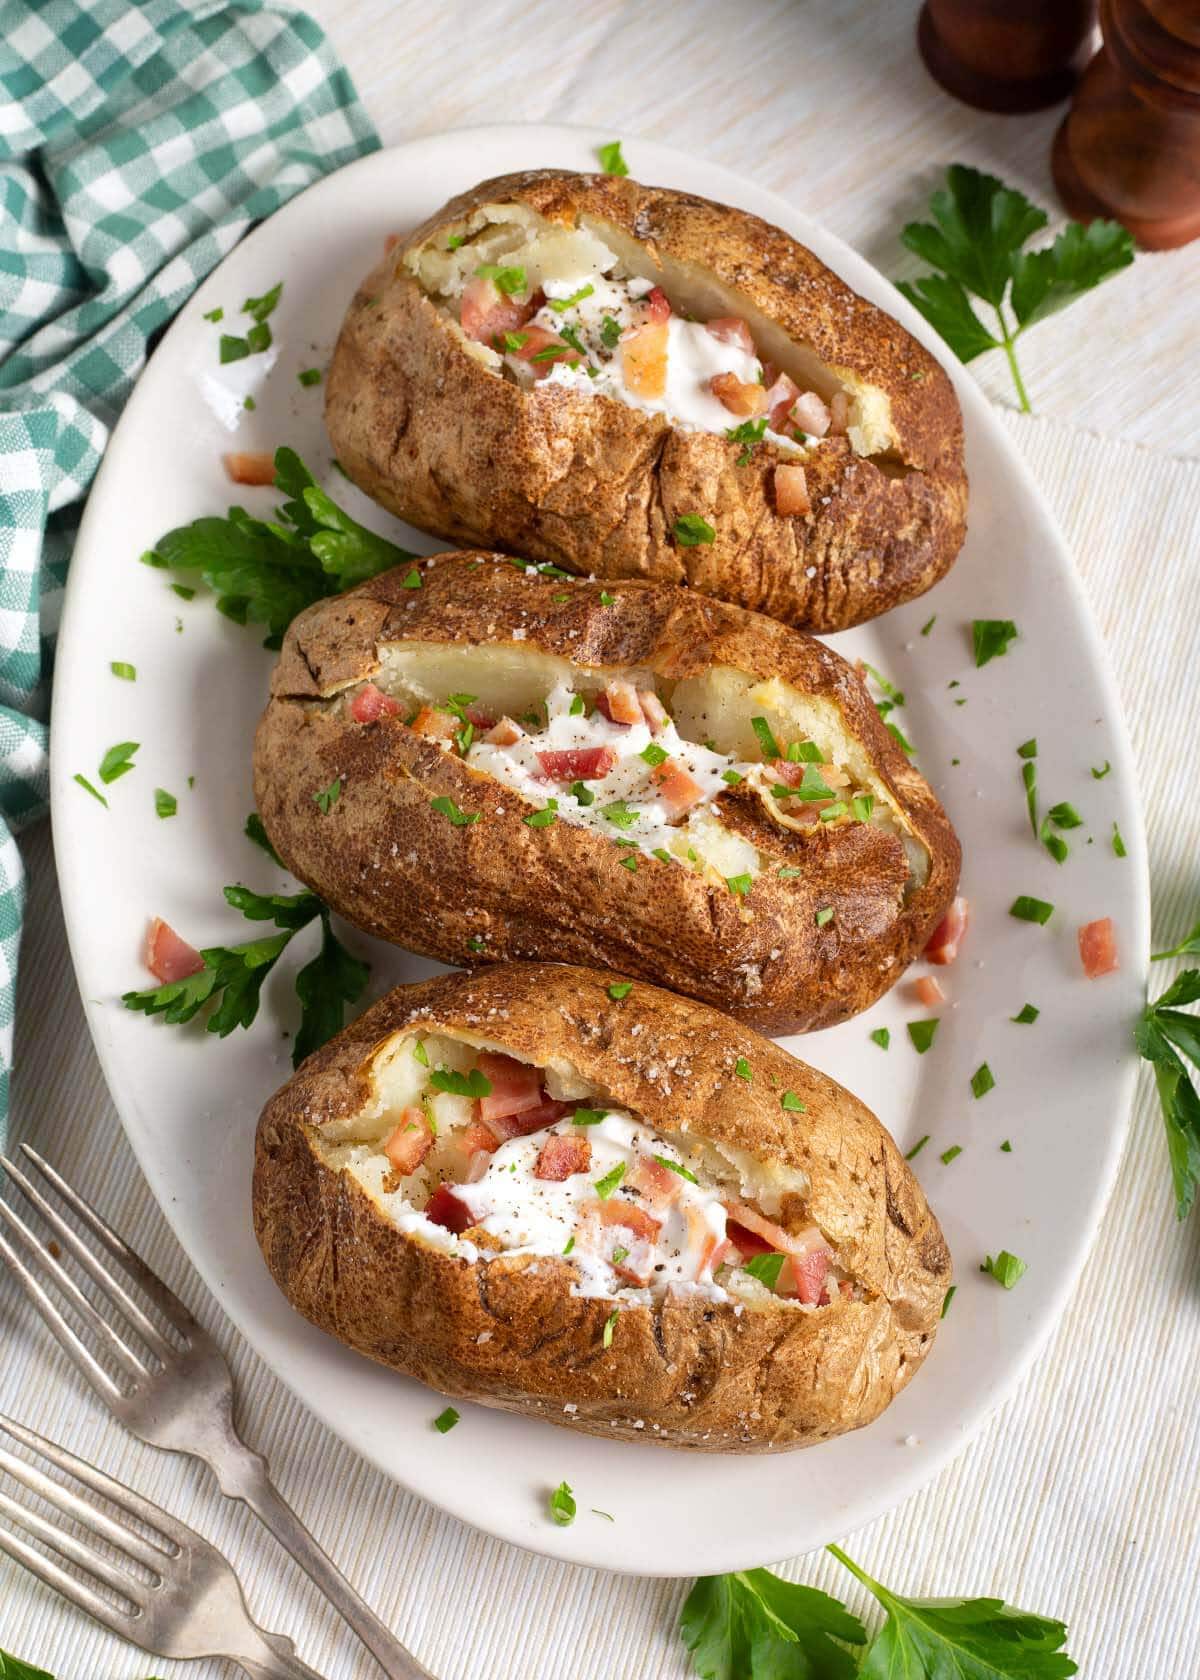 3 baked potatoes on a plate.